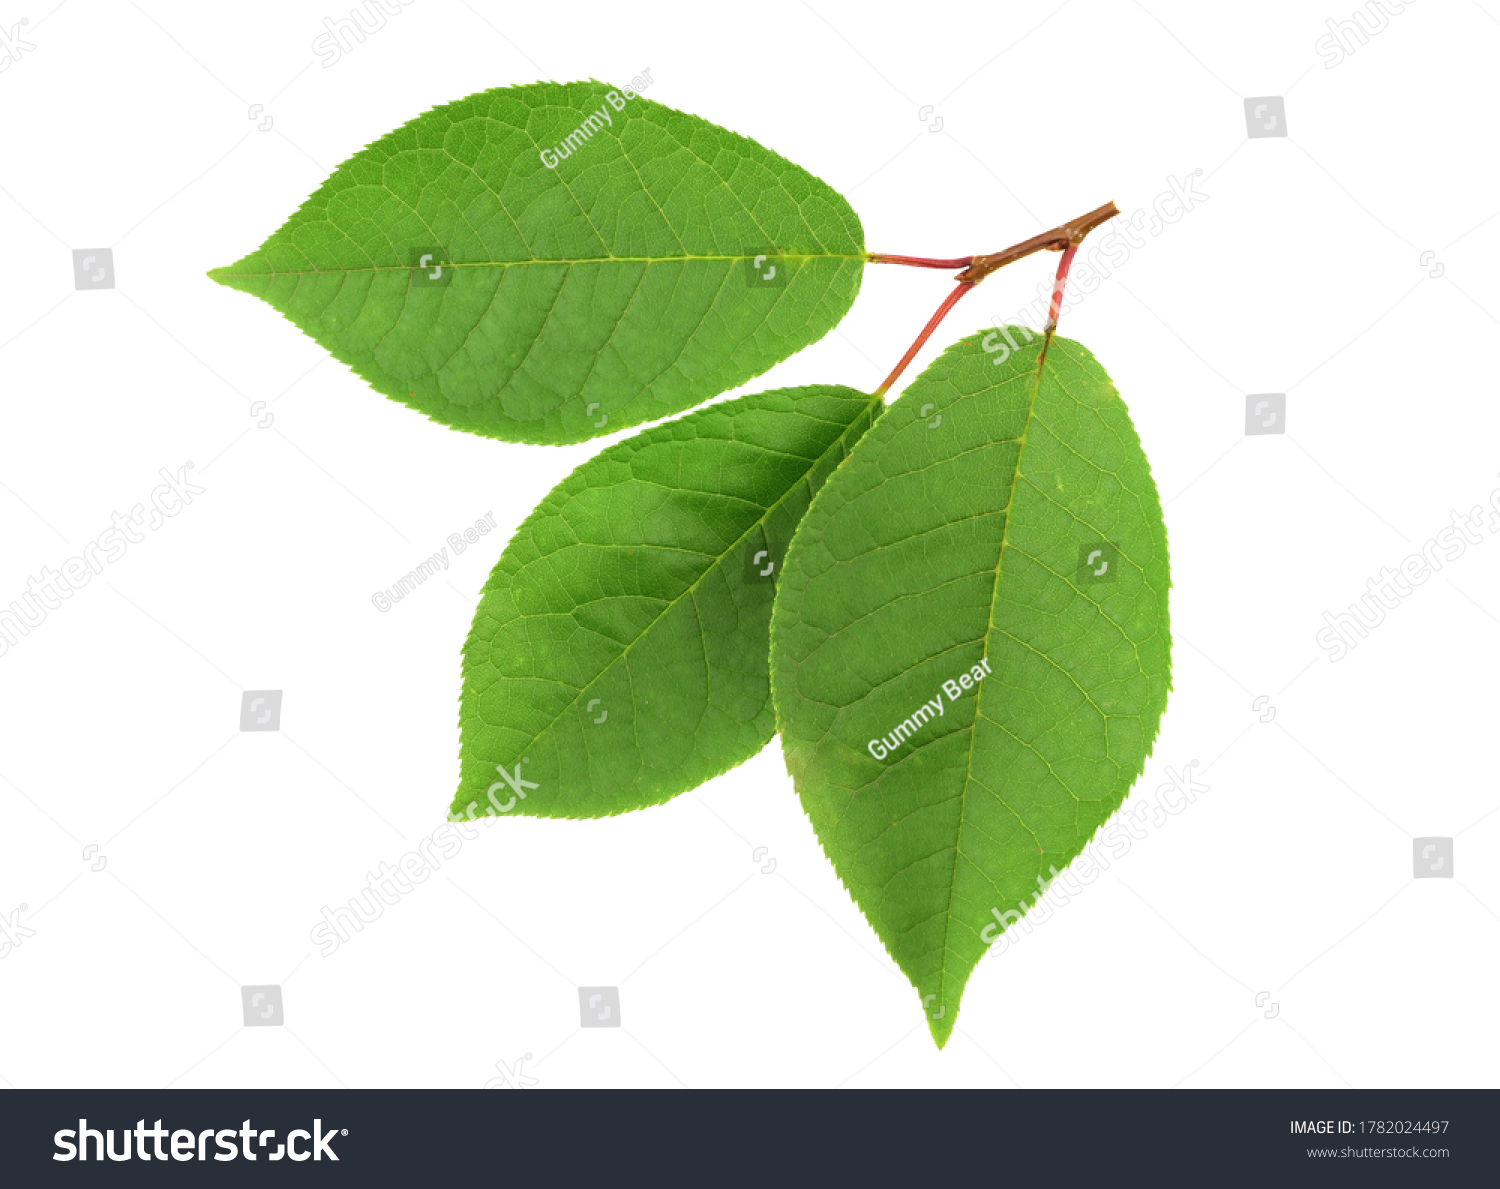 Bird cherry (prunus padus) fresh branch with leaves. Top View.  Also Known as Hackberry, Hagberry, or Mayday Tree. Isolated on white background. #1782024497